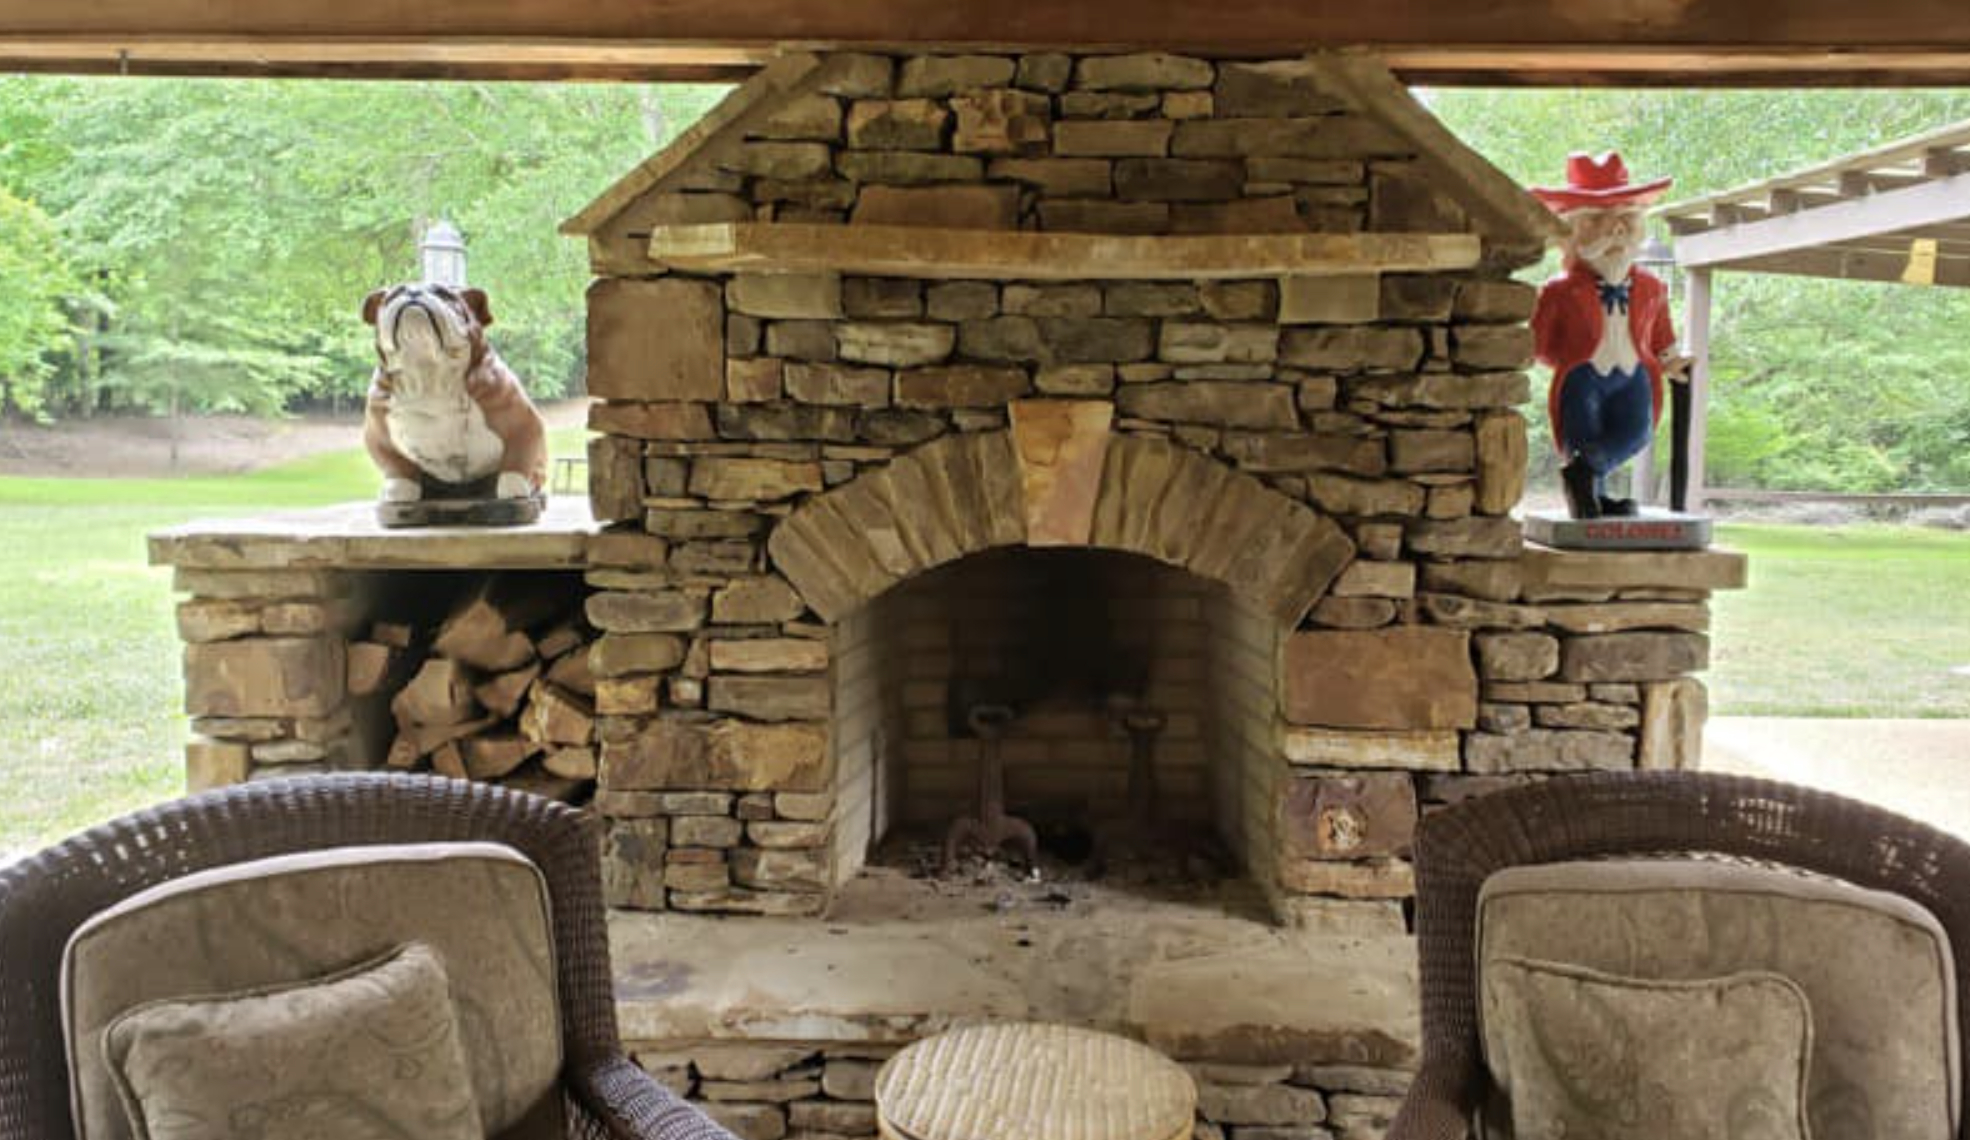 this image shows fireplace in Cypress, California